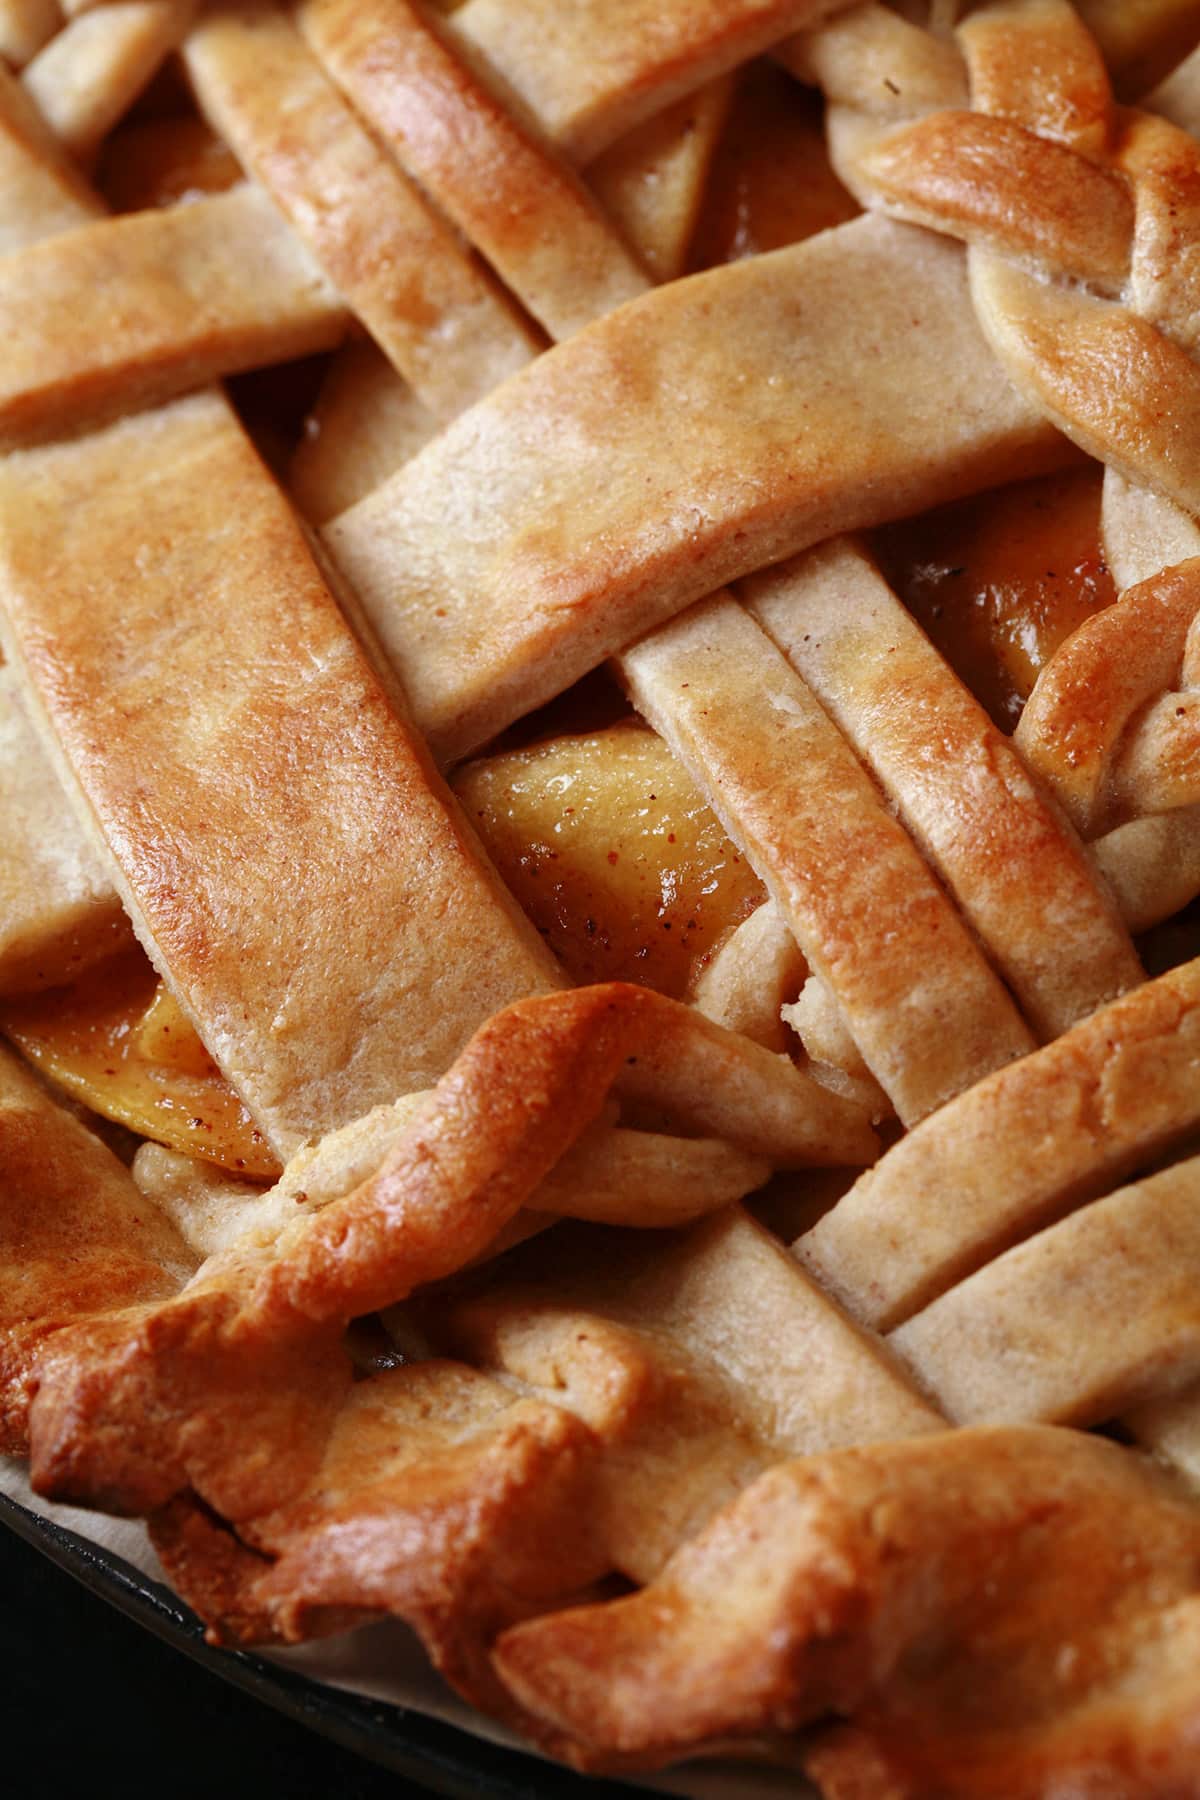 A close up view of a lattice topped pie, made with a gluten-free pie crust.